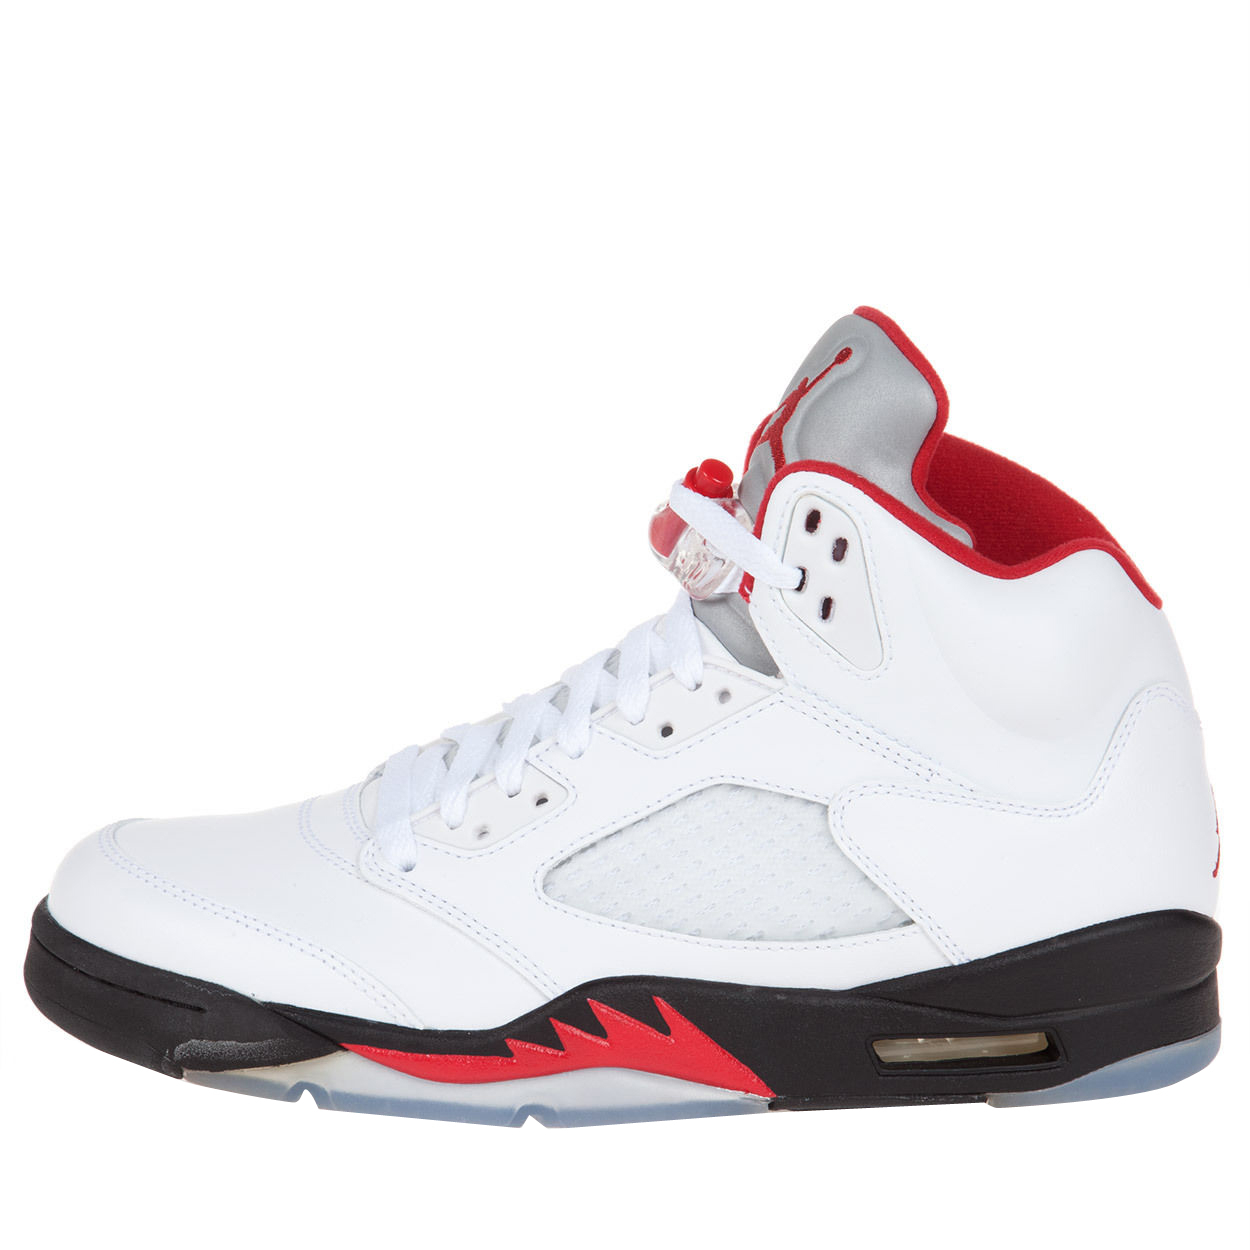 fire red 5s silver tongue